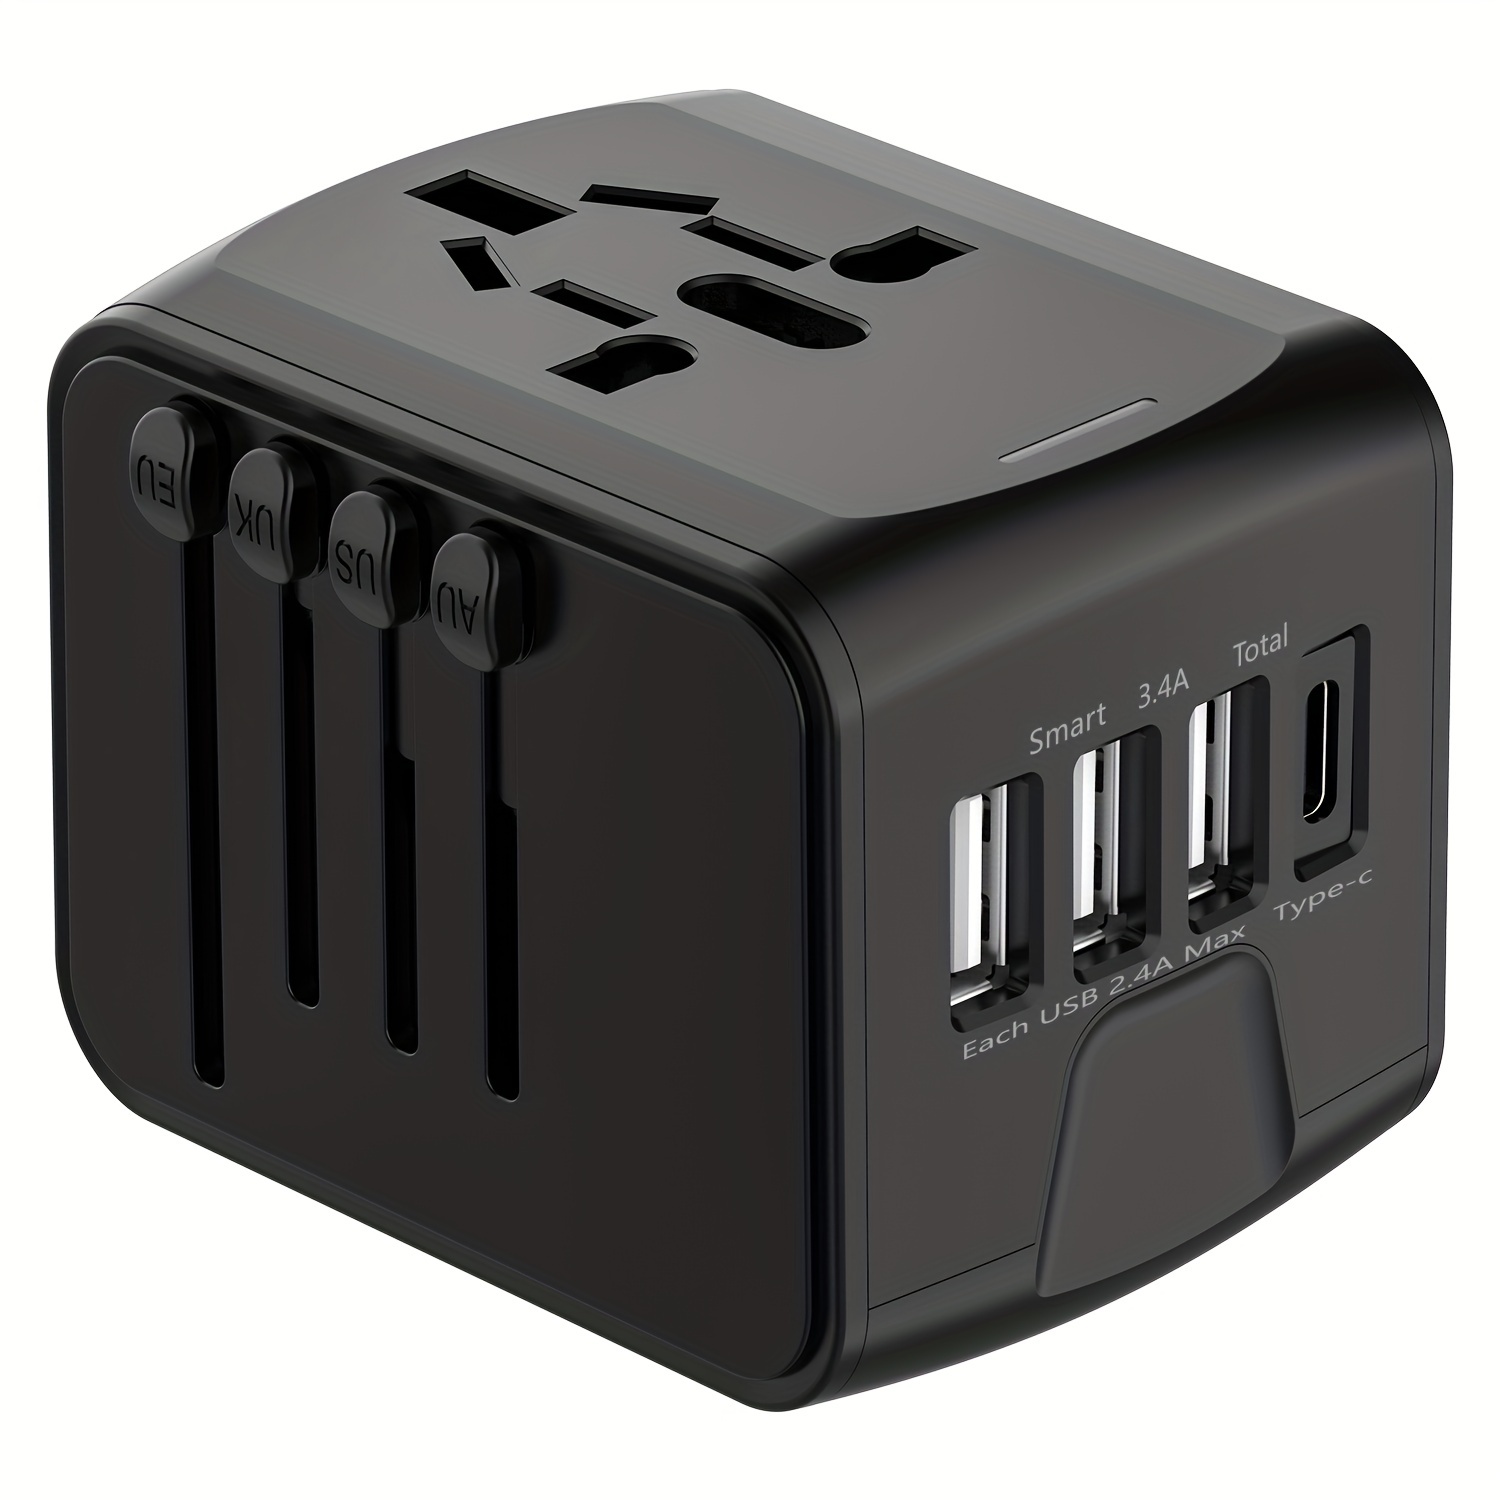 1pc Universal Travel Adapter, Worldwide International Power Adapter, High Speed 2.4A 4*USB, Type-C 3.0A Port With Worldwide AC Power Plug Wall Charger For Europe UK EU US CA AU Italy Asia And More Than 170 Countries